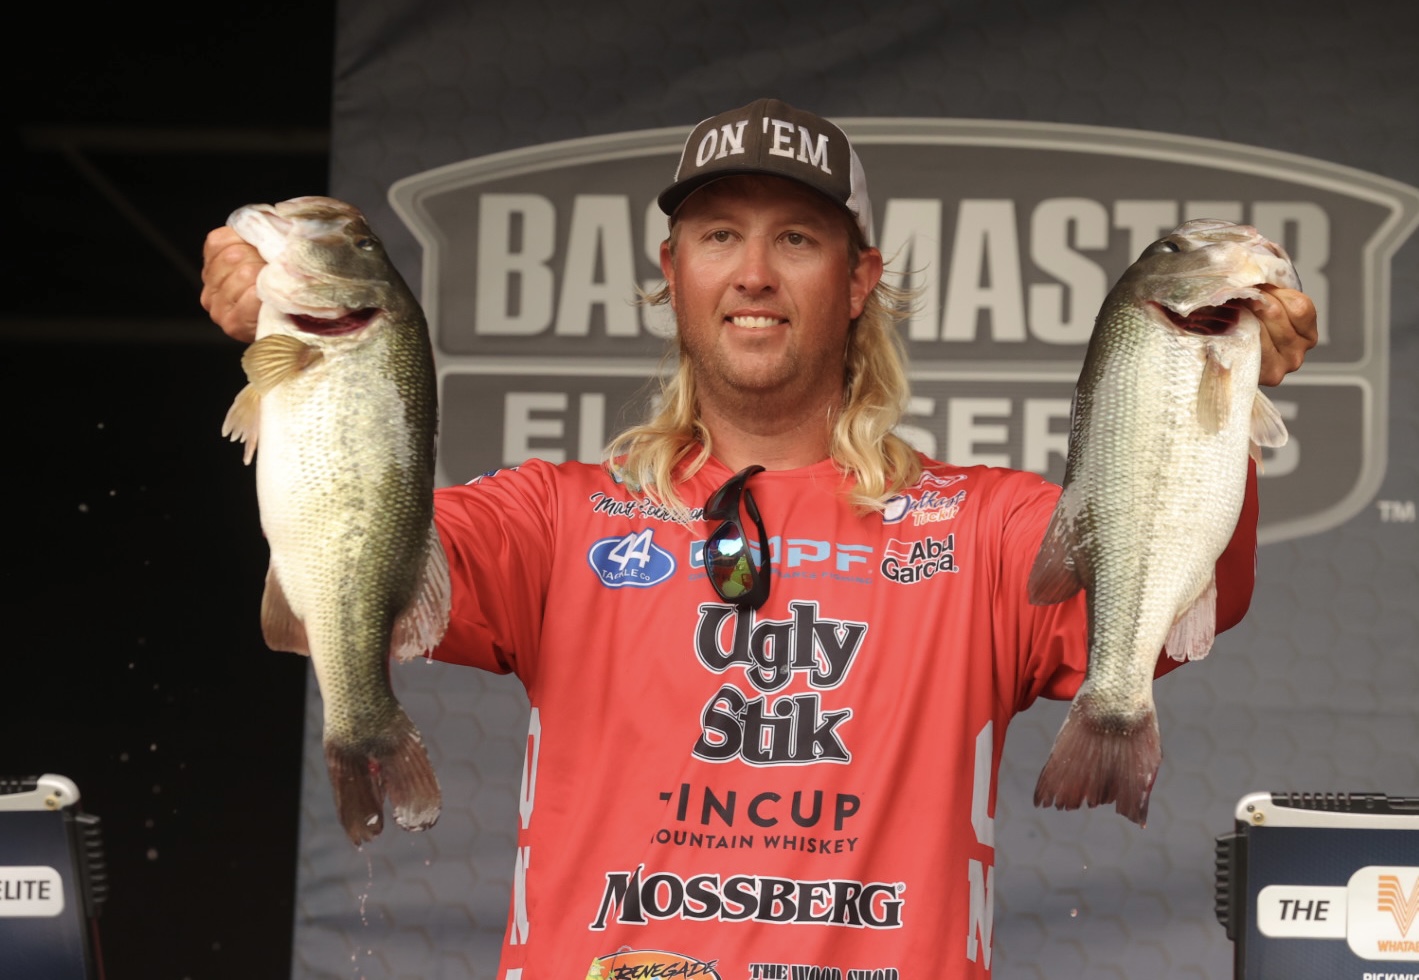 Robertson claims Day 1 lead - Bassmaster